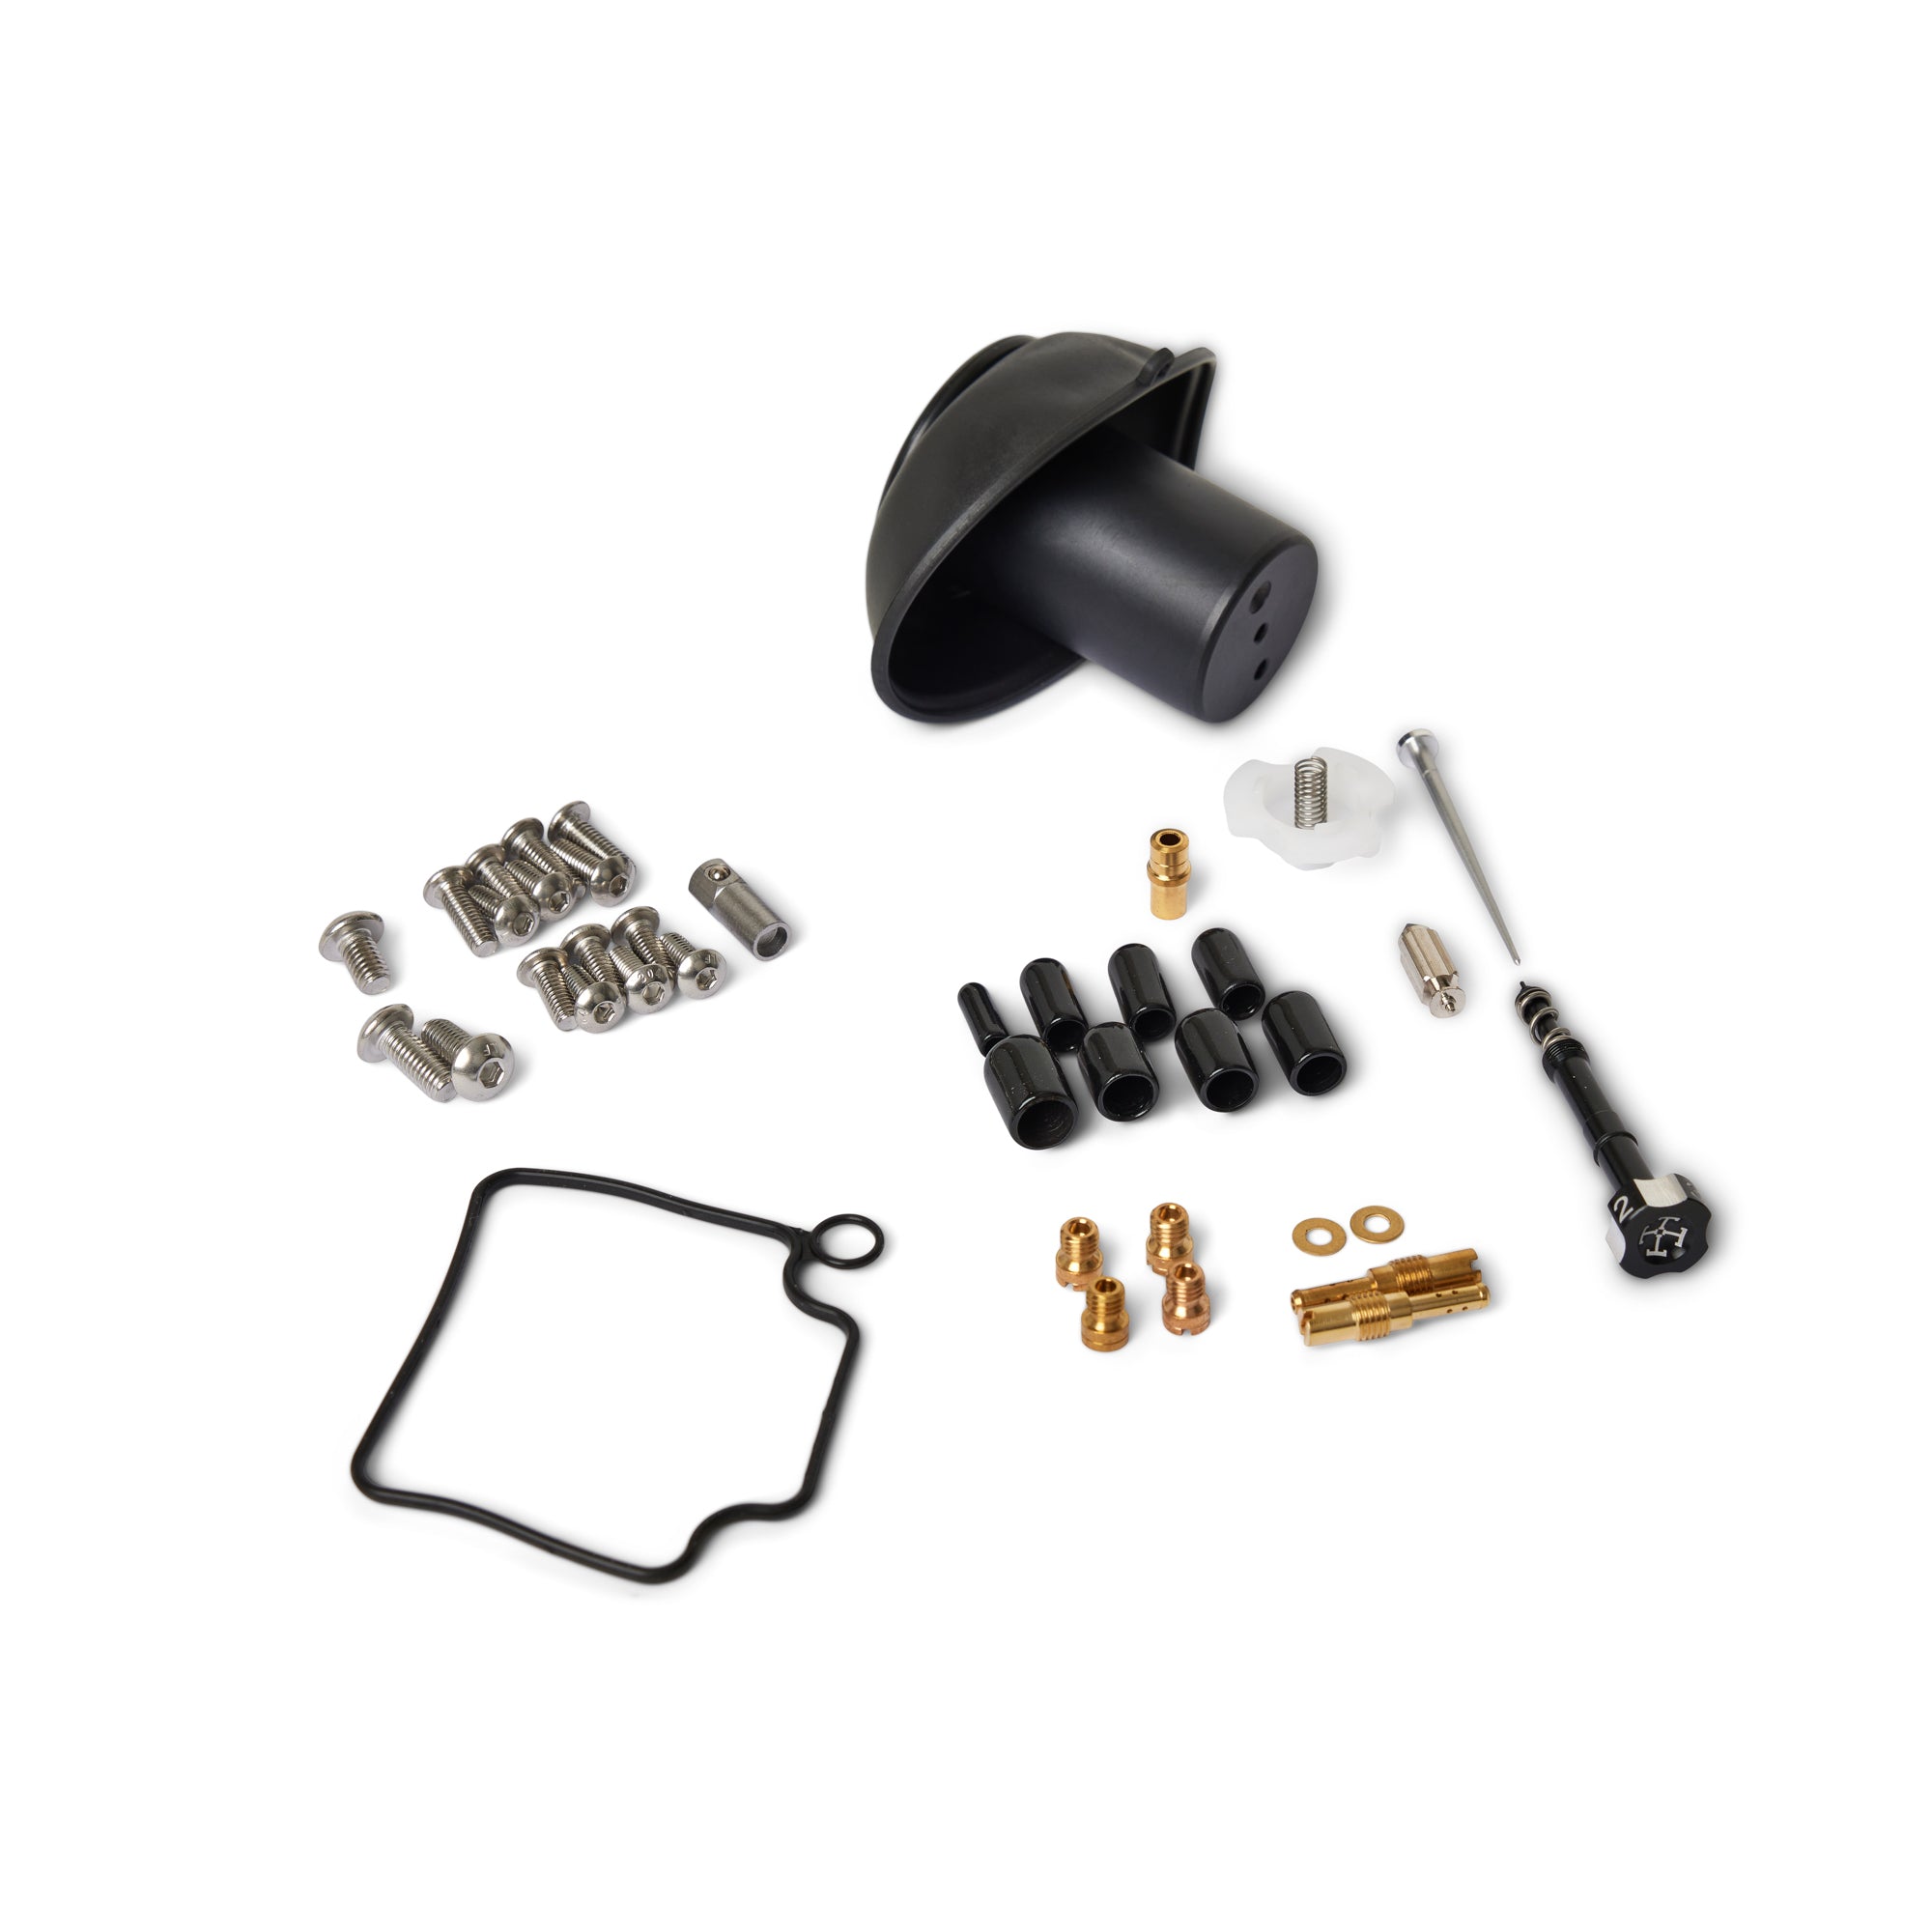 Complete Performance Carb Rebuild and Tuning Kit - Honda Shadow VT600 VLX 1999-2007 Single Carb